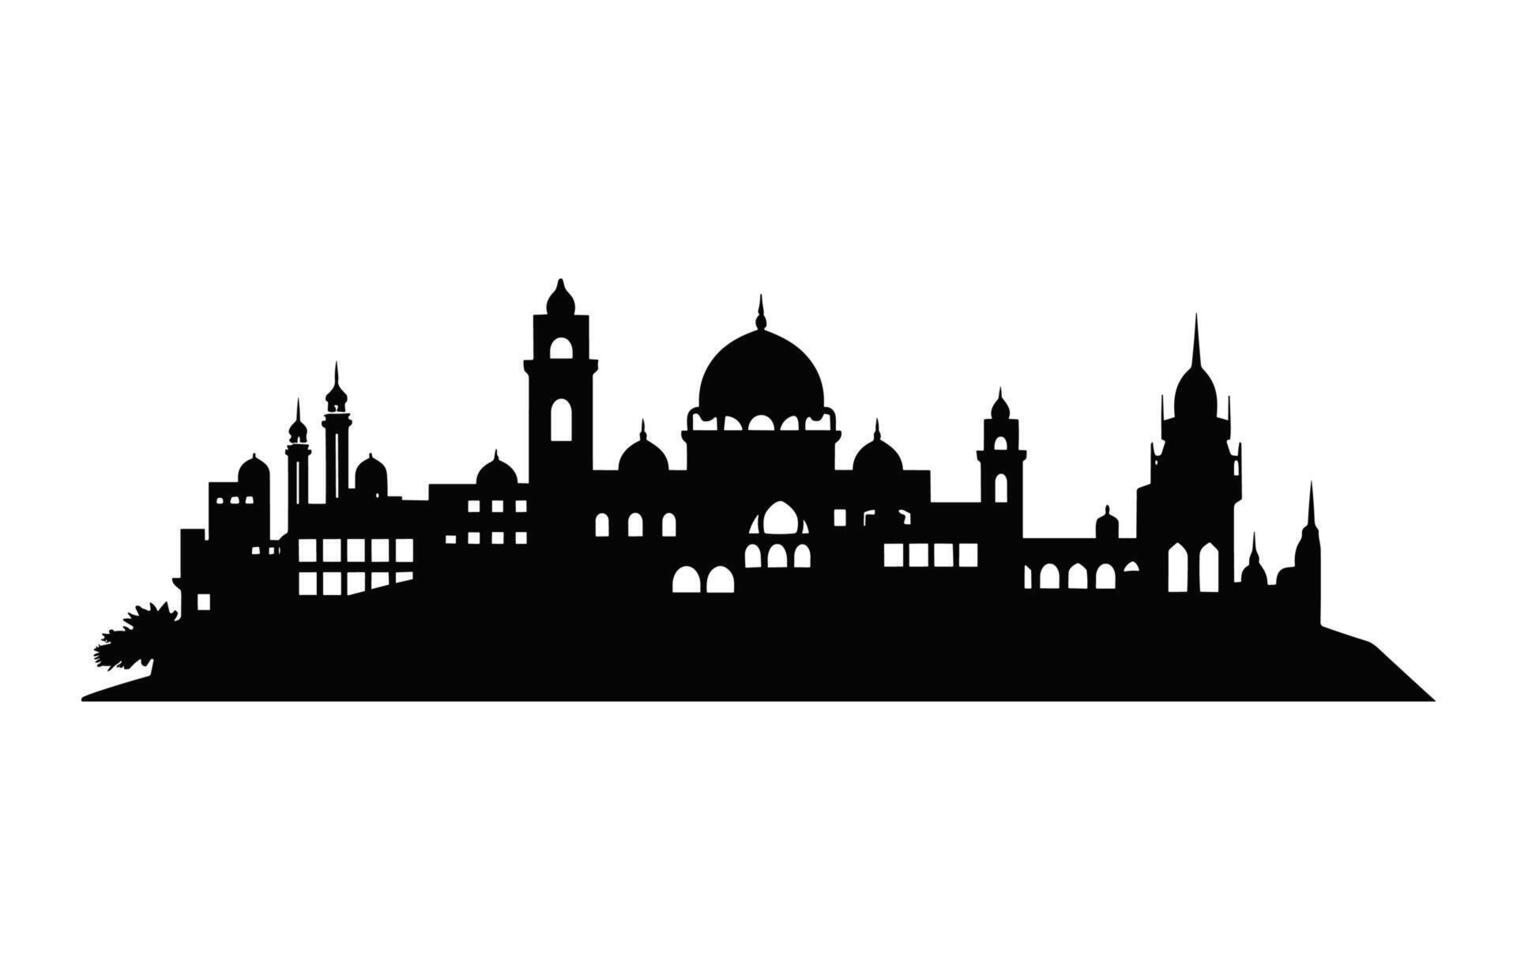 Jaipur City Skyline black and white Silhouette isolated on a white background vector